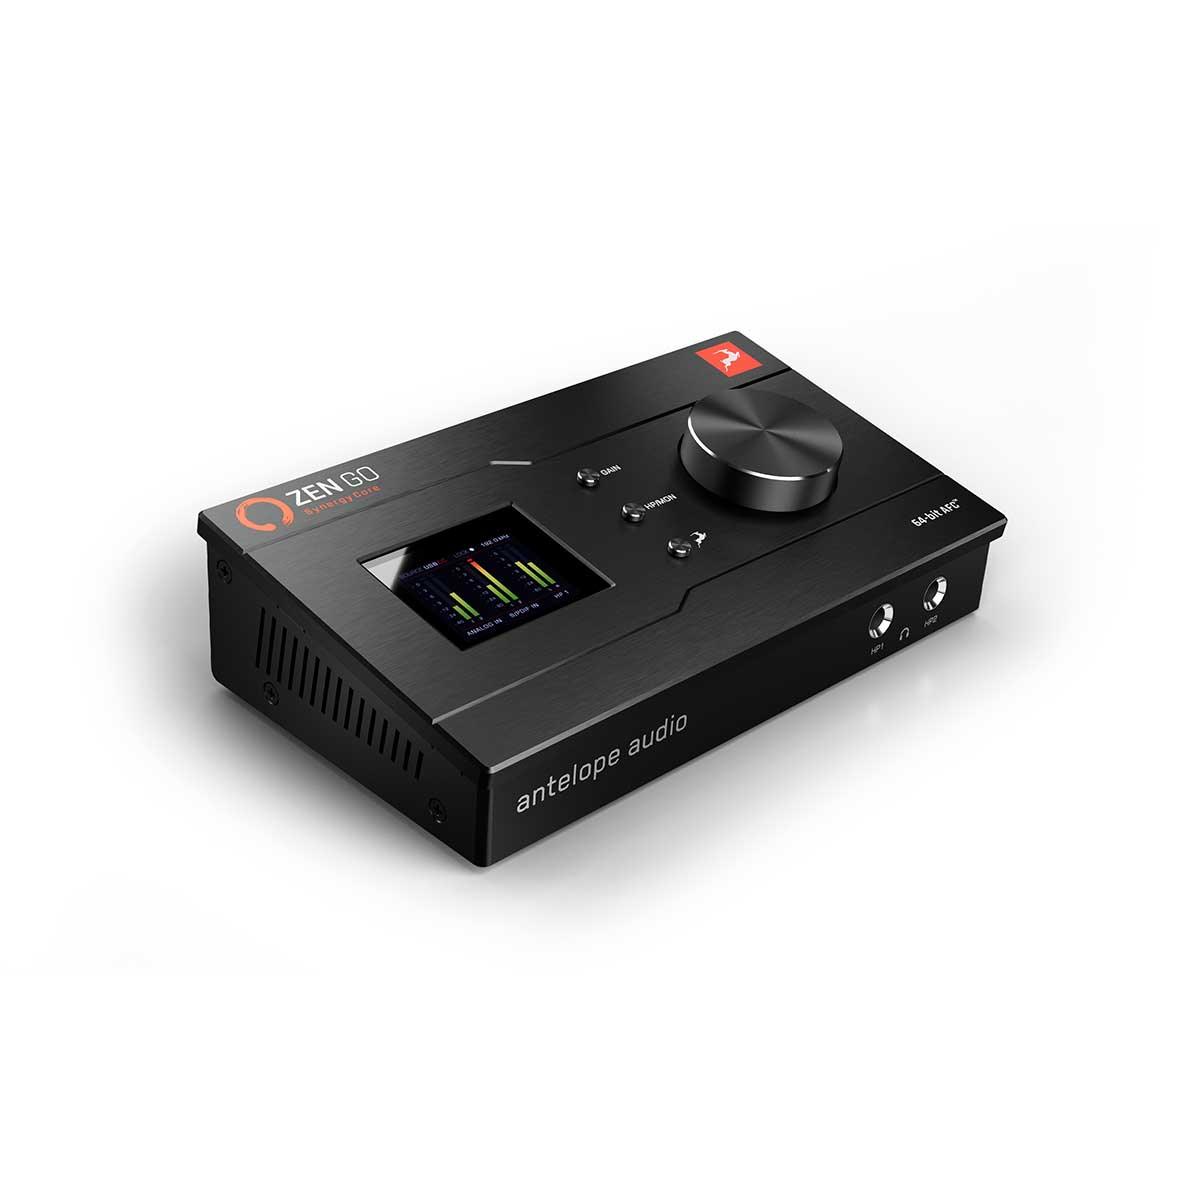 Antelope Audio Zen Go Synergy Core 4x8 USB-C Audio Interface with Real-time DSP Effects